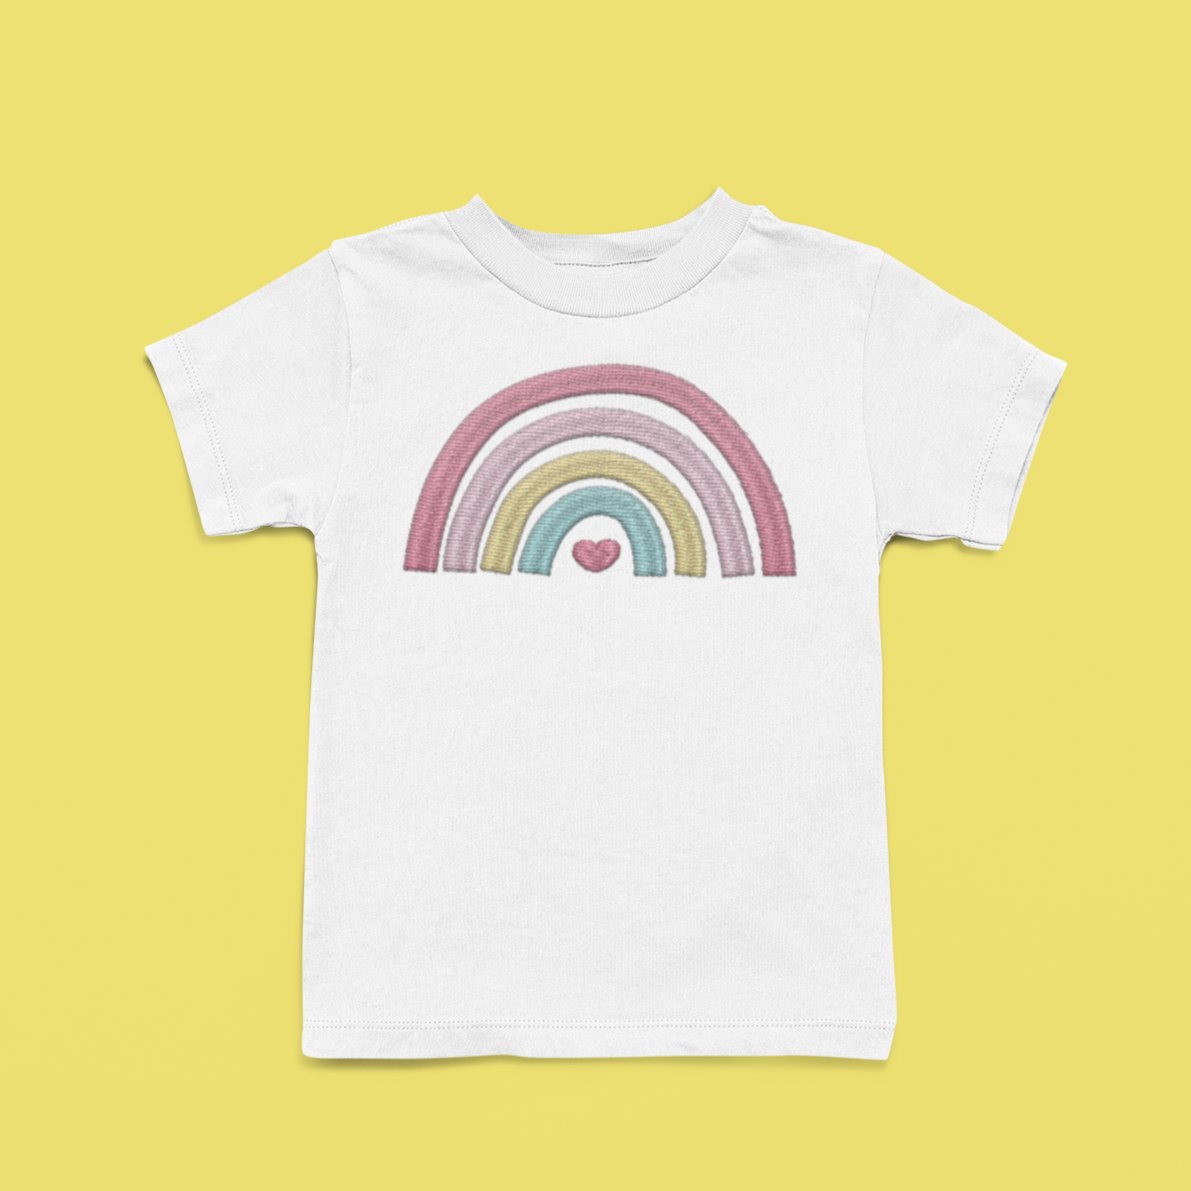 Child's Rainbow Embroidered T-Shirt - Summertide Stitchery - Summertide Stitchery